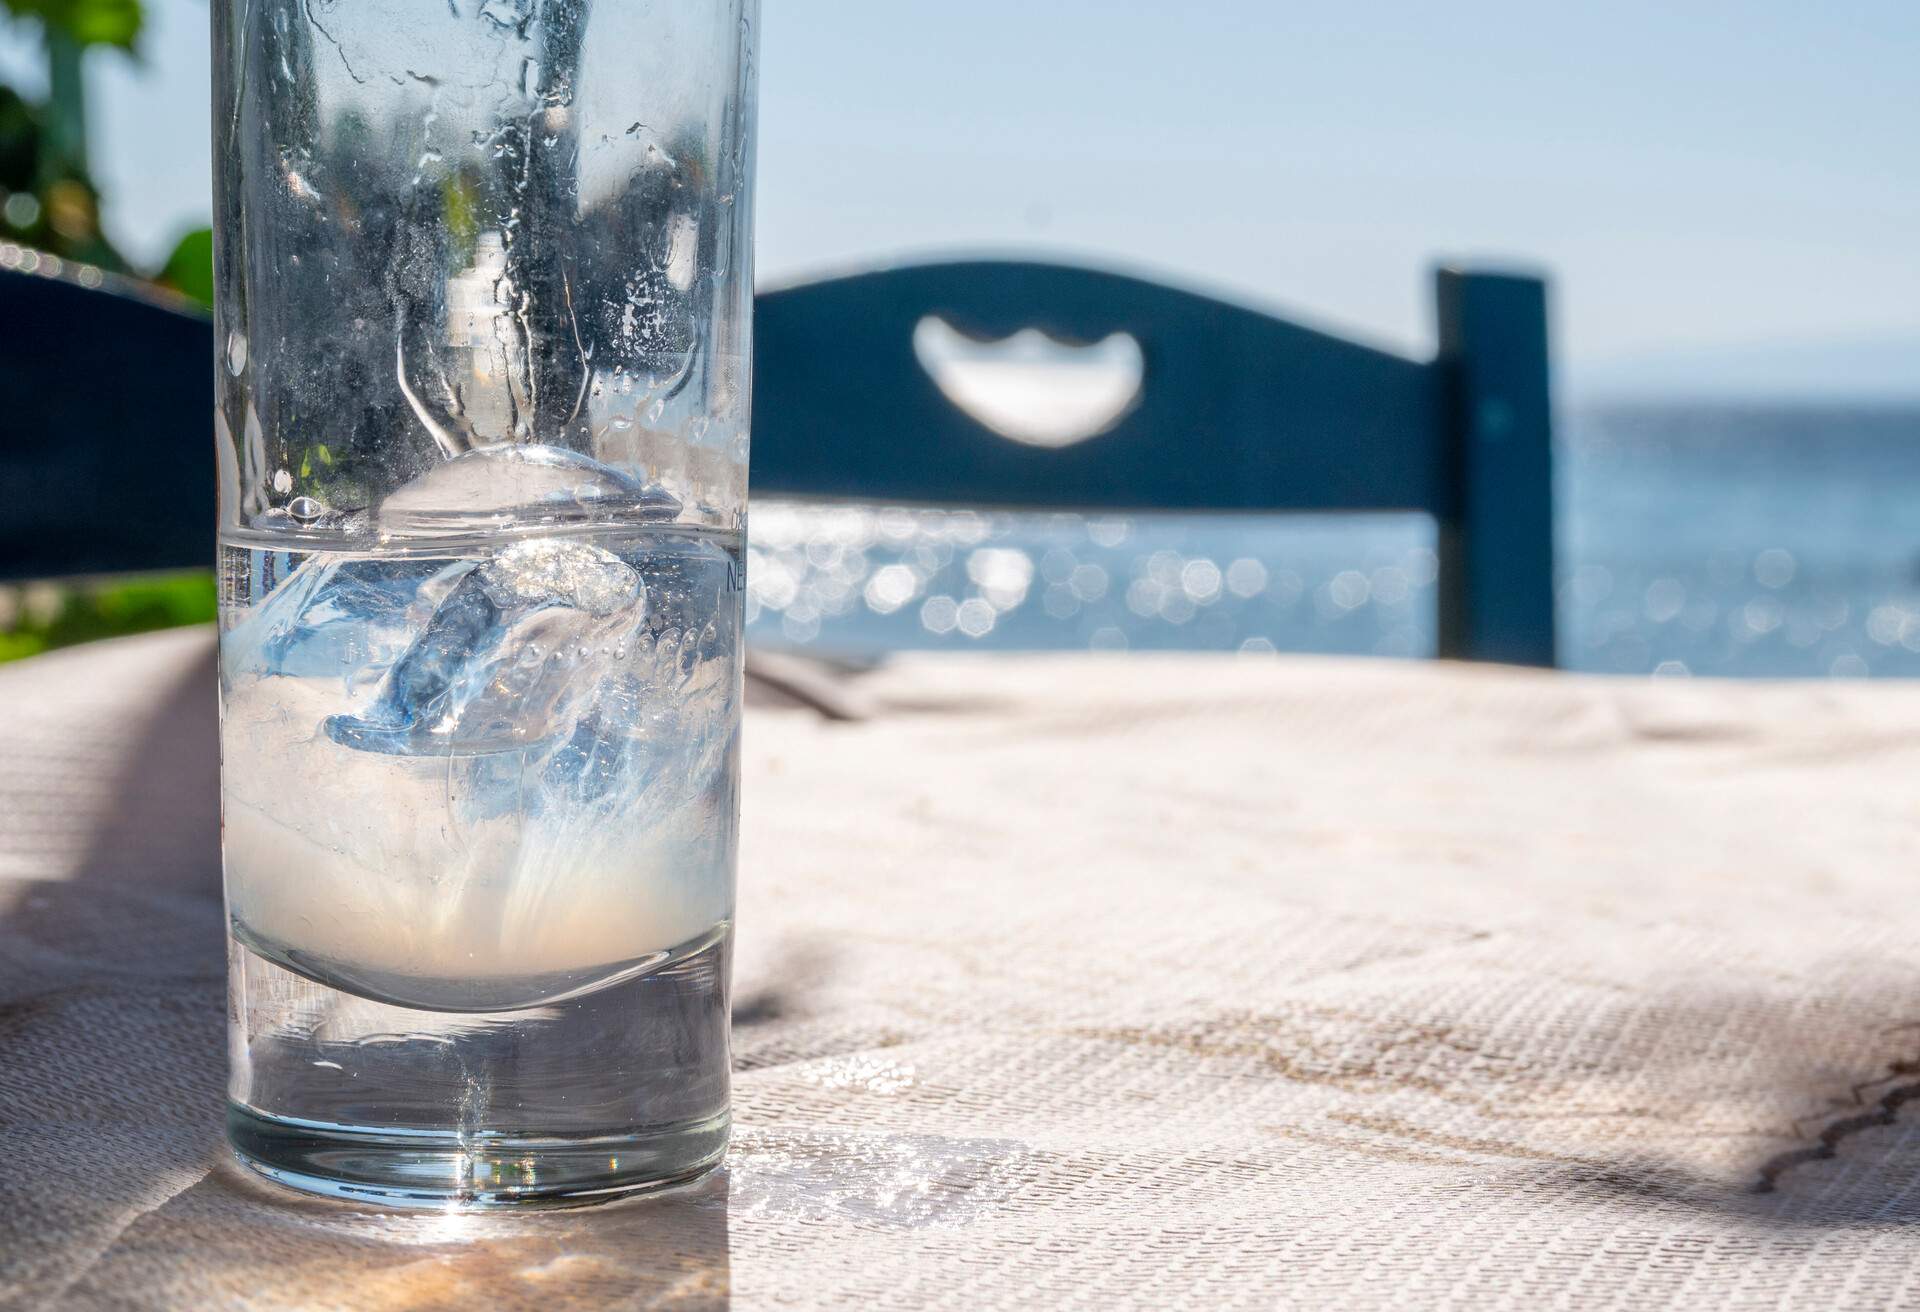 A Greek traditional spirit, glass of ouzo under sunlight, at the beach restaurant table.